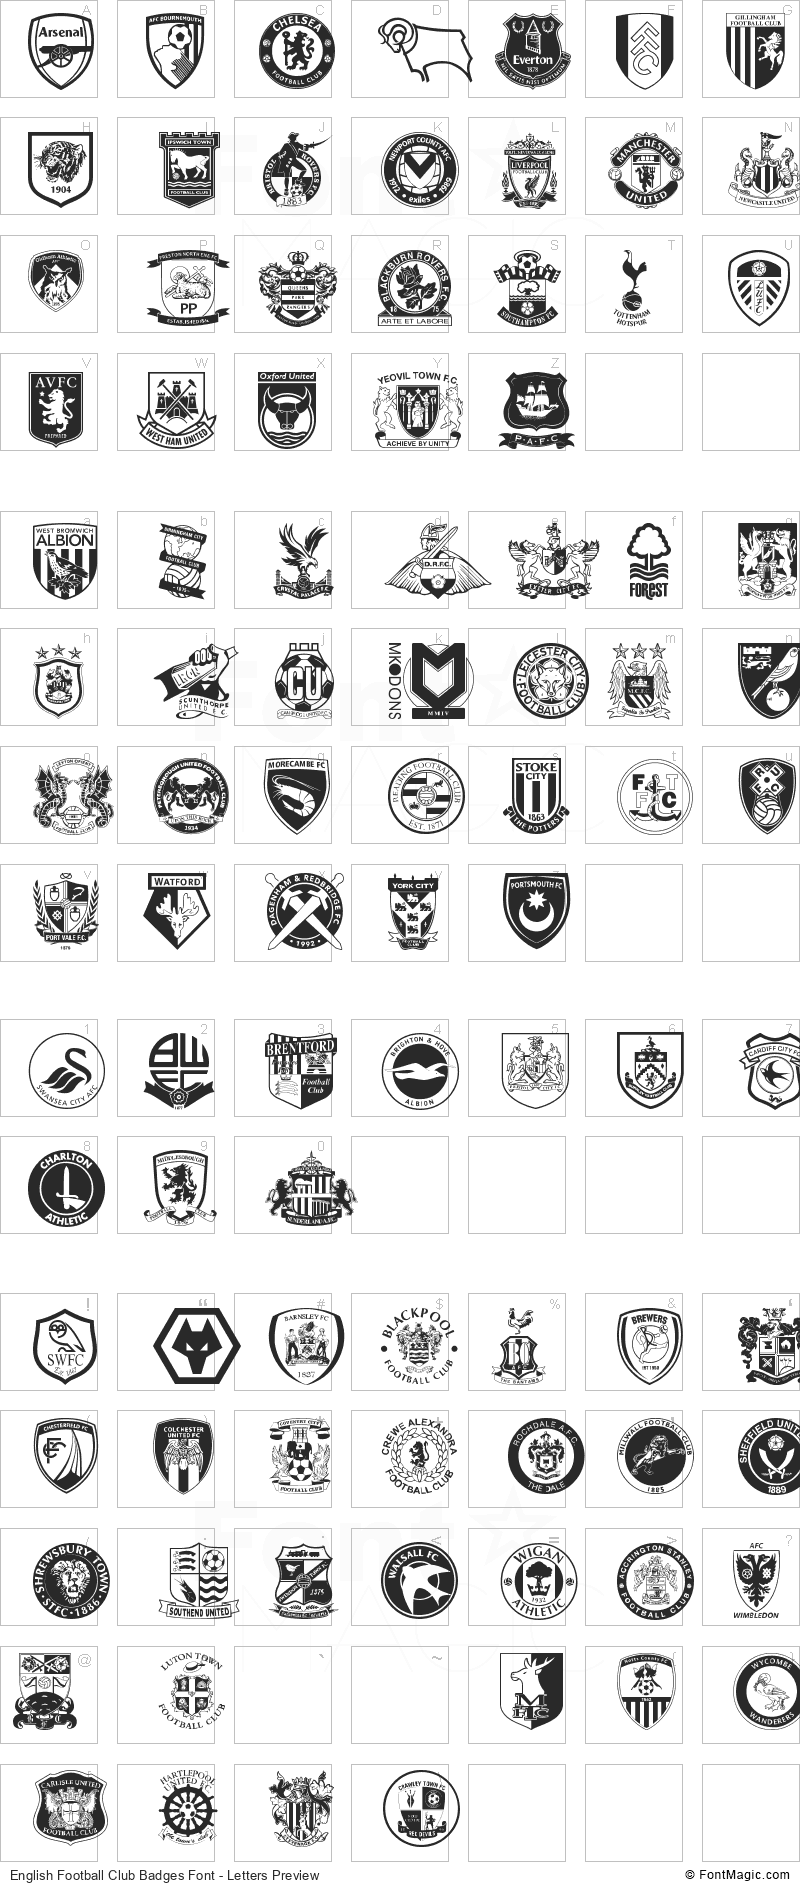 English Football Club Badges Font - All Latters Preview Chart